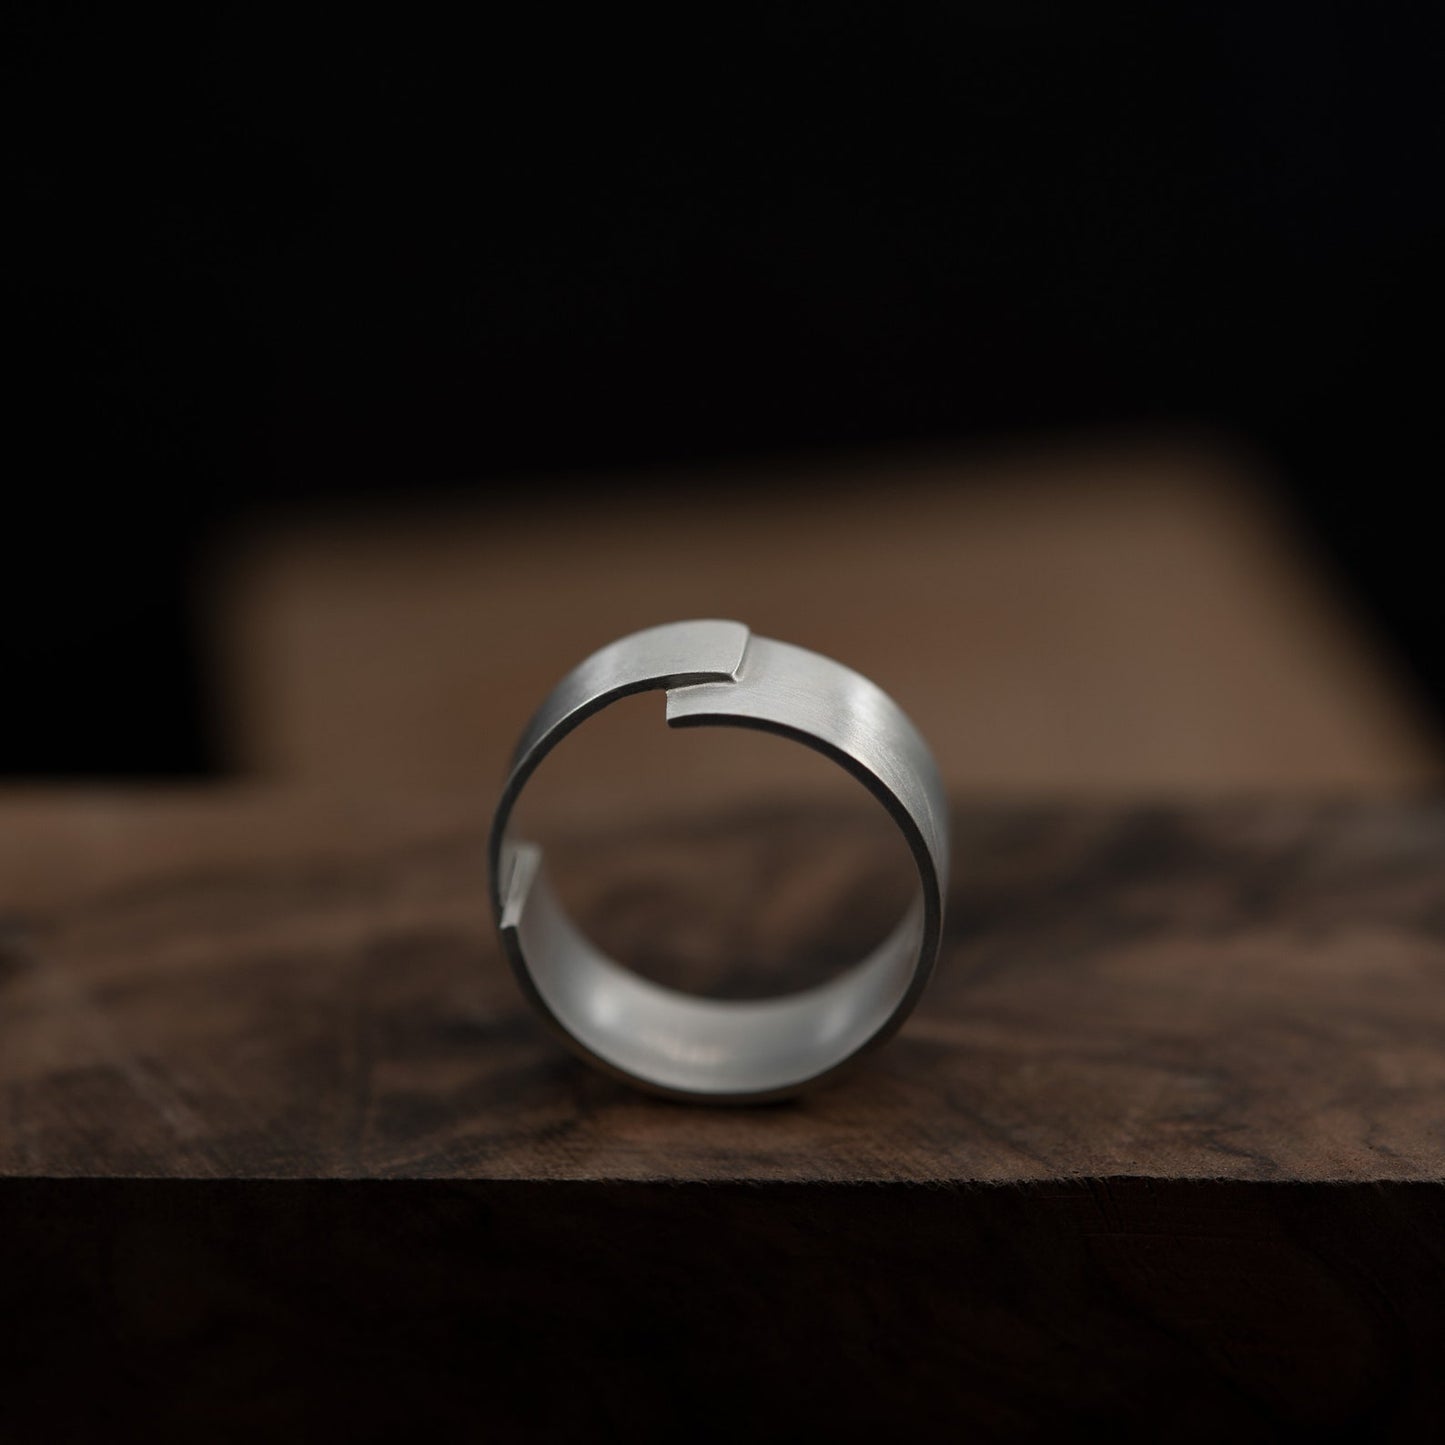 Wide band silver ring